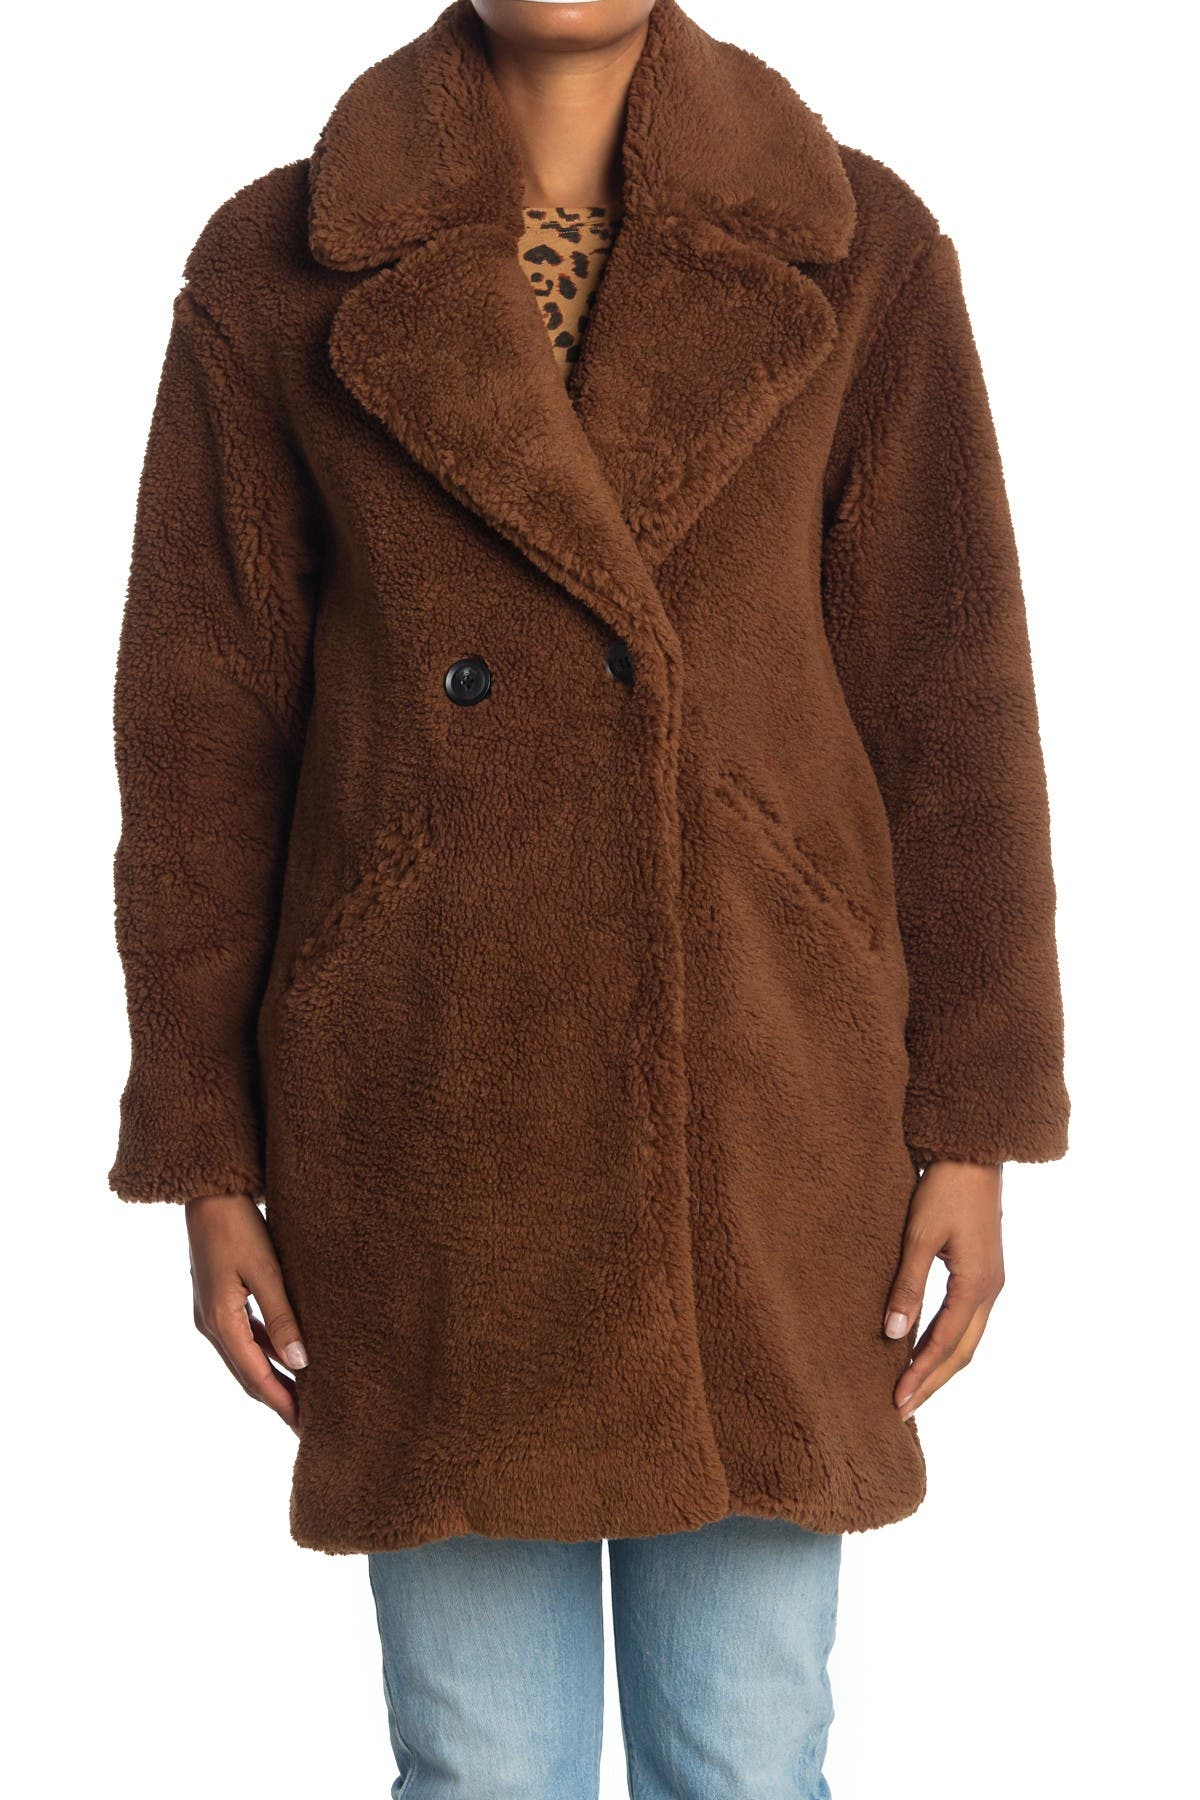 Lucky Brand | Double Breasted Faux Teddy Fur Coat | Nordstrom Rack